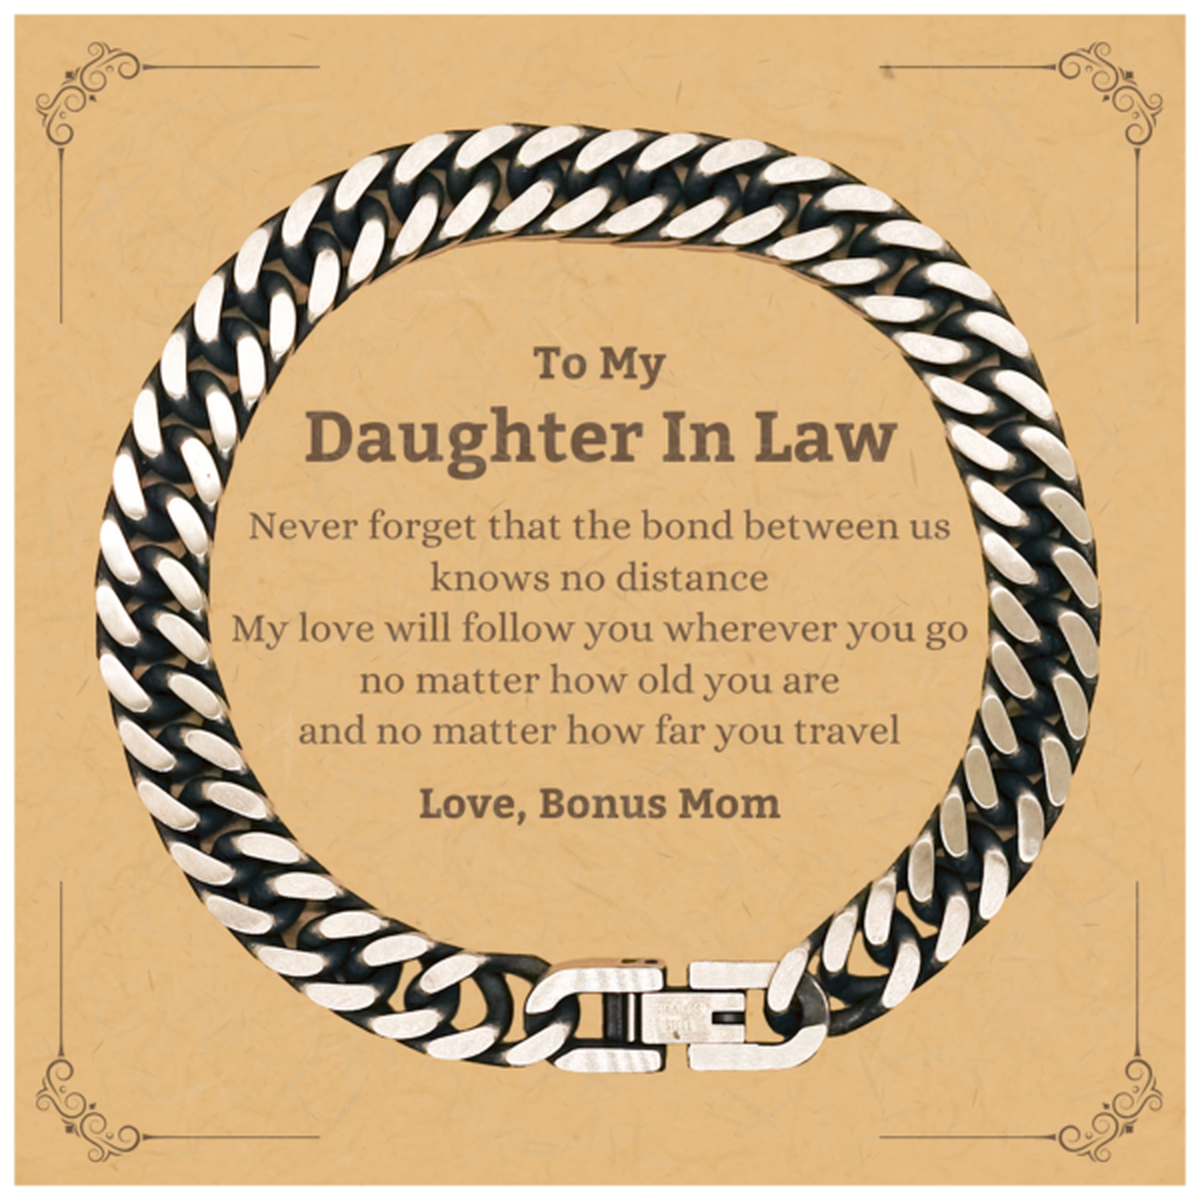 Daughter In Law Birthday Gifts from Bonus Mom, Adjustable Cuban Link Chain Bracelet for Daughter In Law Christmas Graduation Unique Gifts Daughter In Law Never forget that the bond between us knows no distance. Love, Bonus Mom